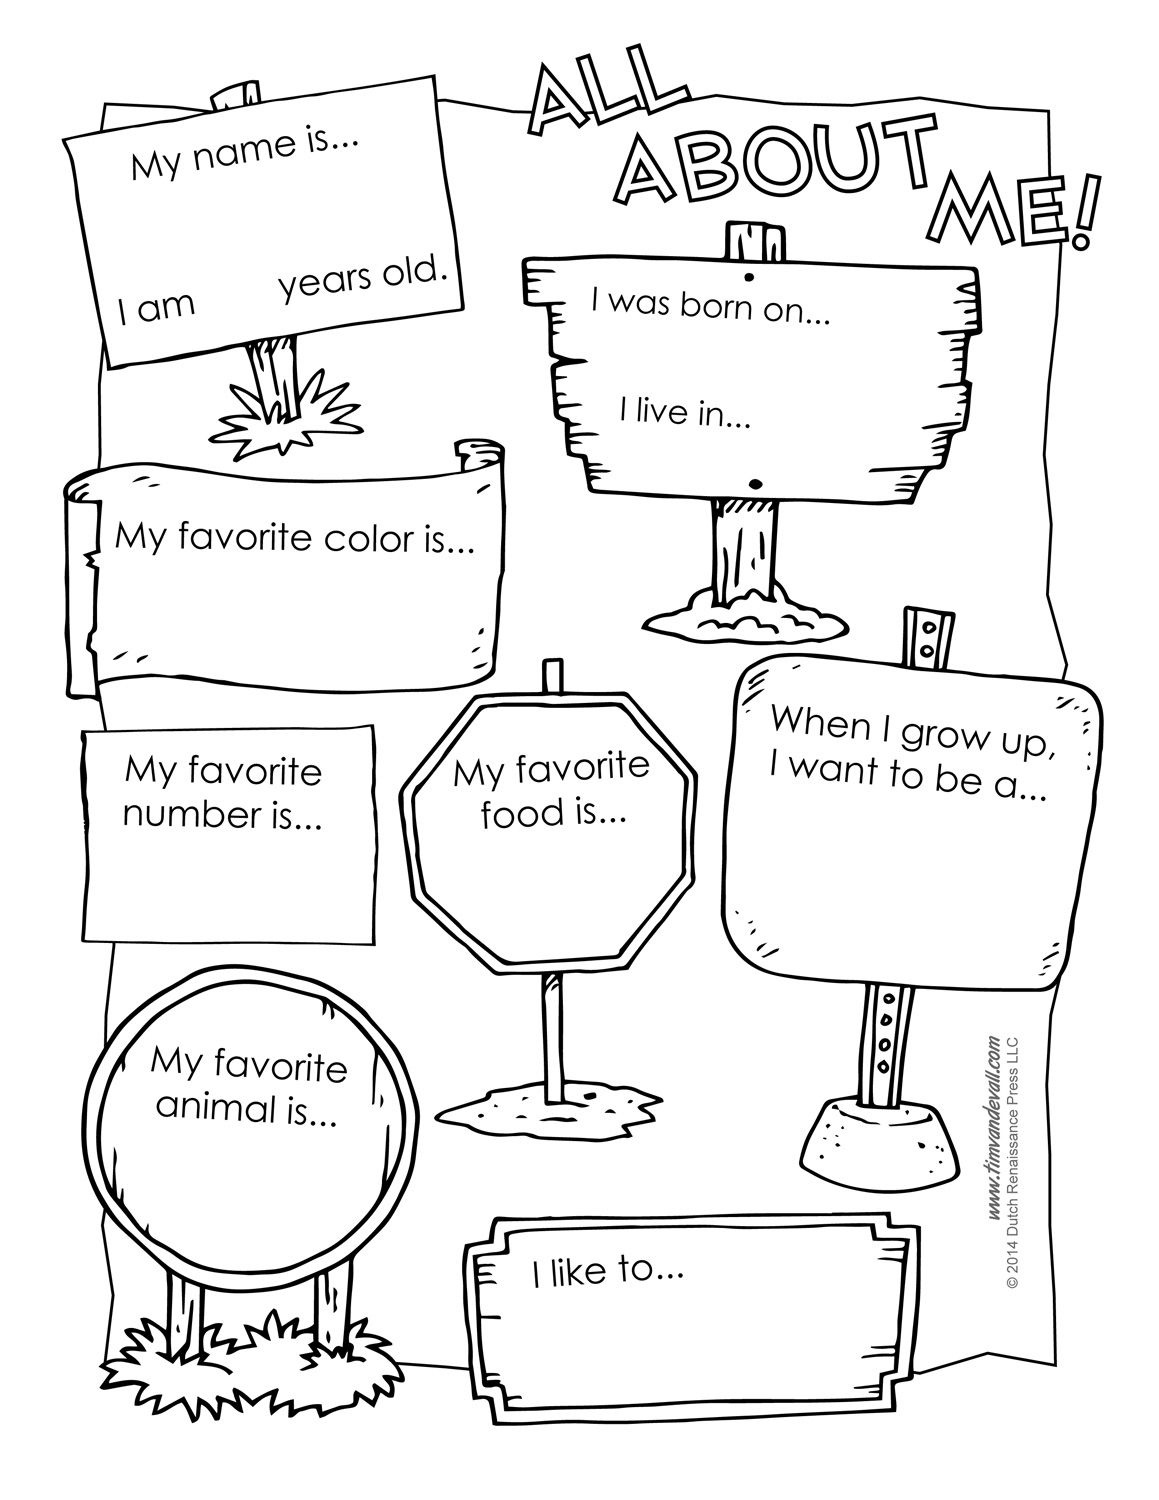 All About Me Preschool Template | 6 Best Images Of All About Me - Free Printable All About Me Worksheet